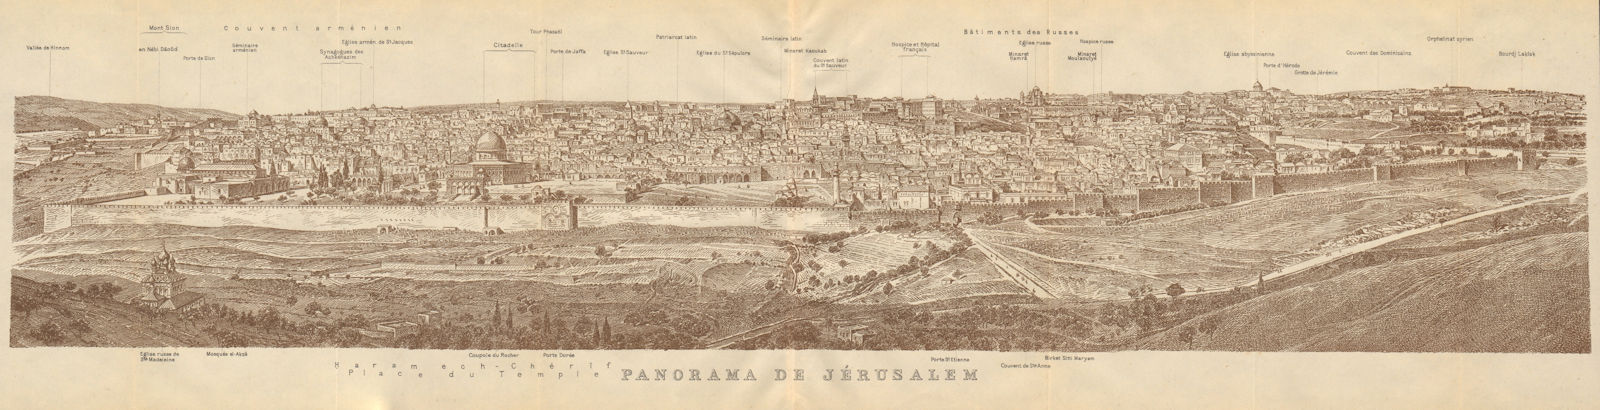 Panorama of Jerusalem from the Mount of Olives. Israel 1912 old antique map